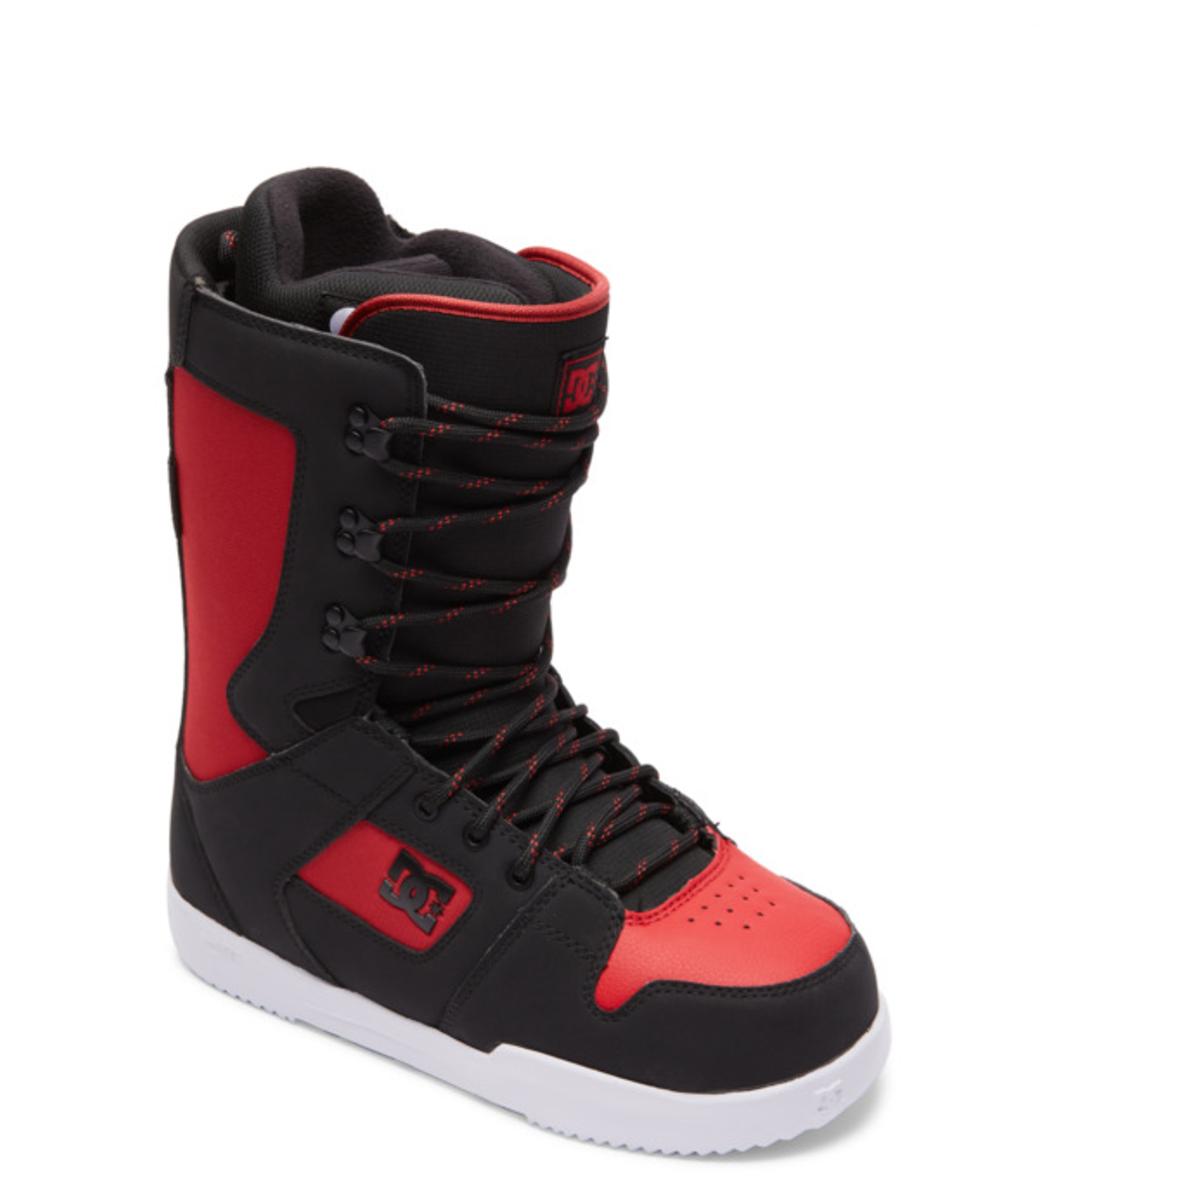 DC Phase 2023 Men's Snowboard Boots